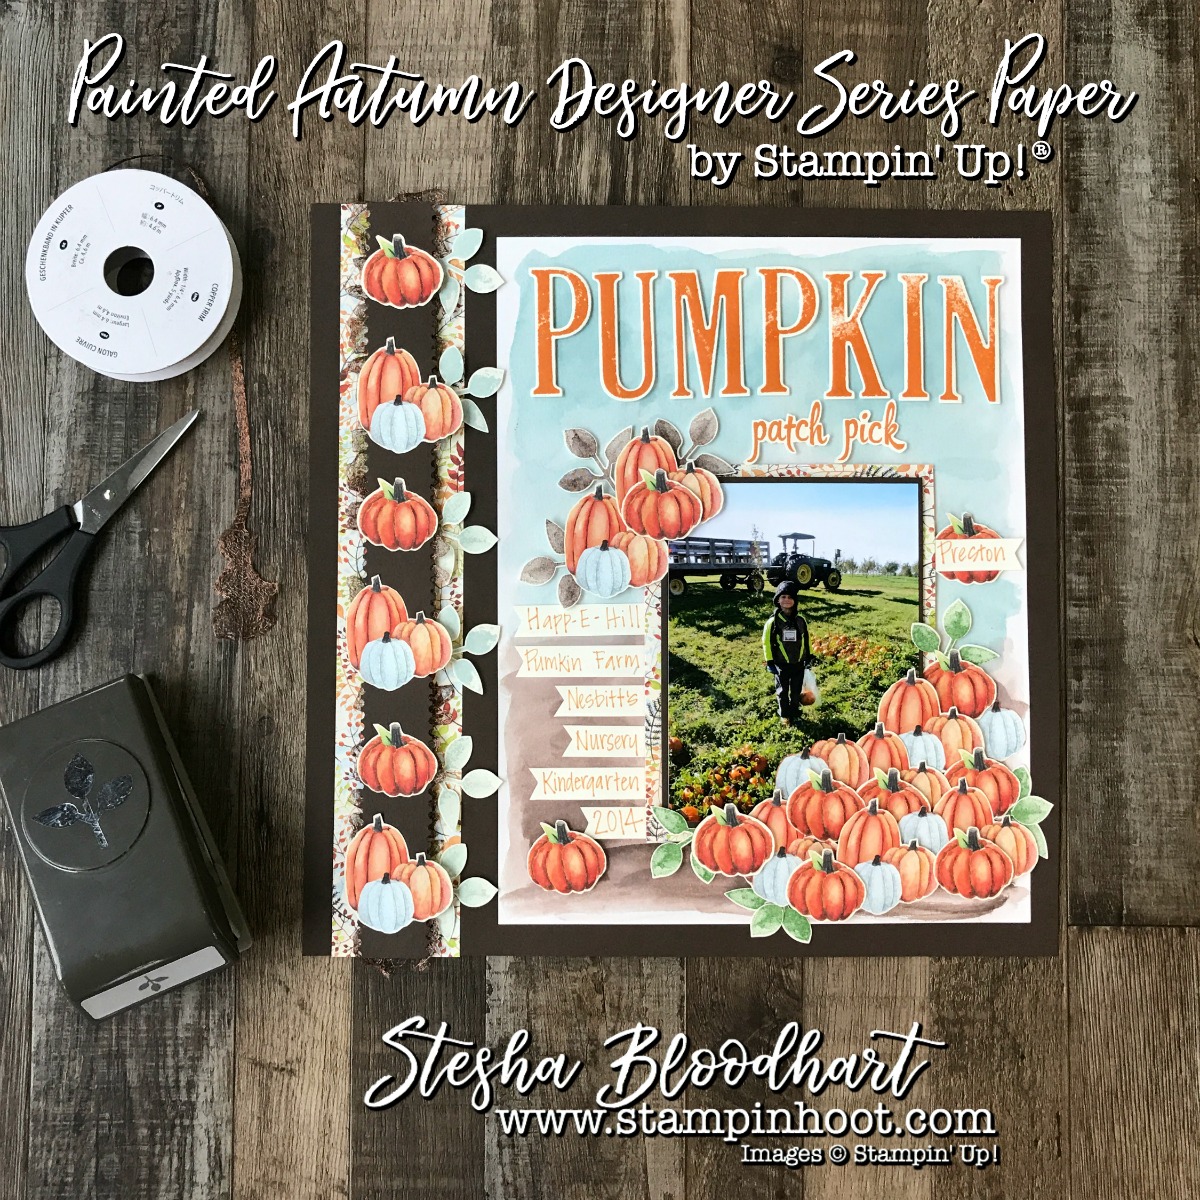 Painted Autumn Designer Series Paper for a Pumpkin Patch Scrapbook Page, details and daily inspiration at Stampin' Hoot! Stesha Bloodhart #scrapbook #scrapbooklayout #paintedautumndsp #fall #pumpkins #stampinup #stampinhoot #papercrafts